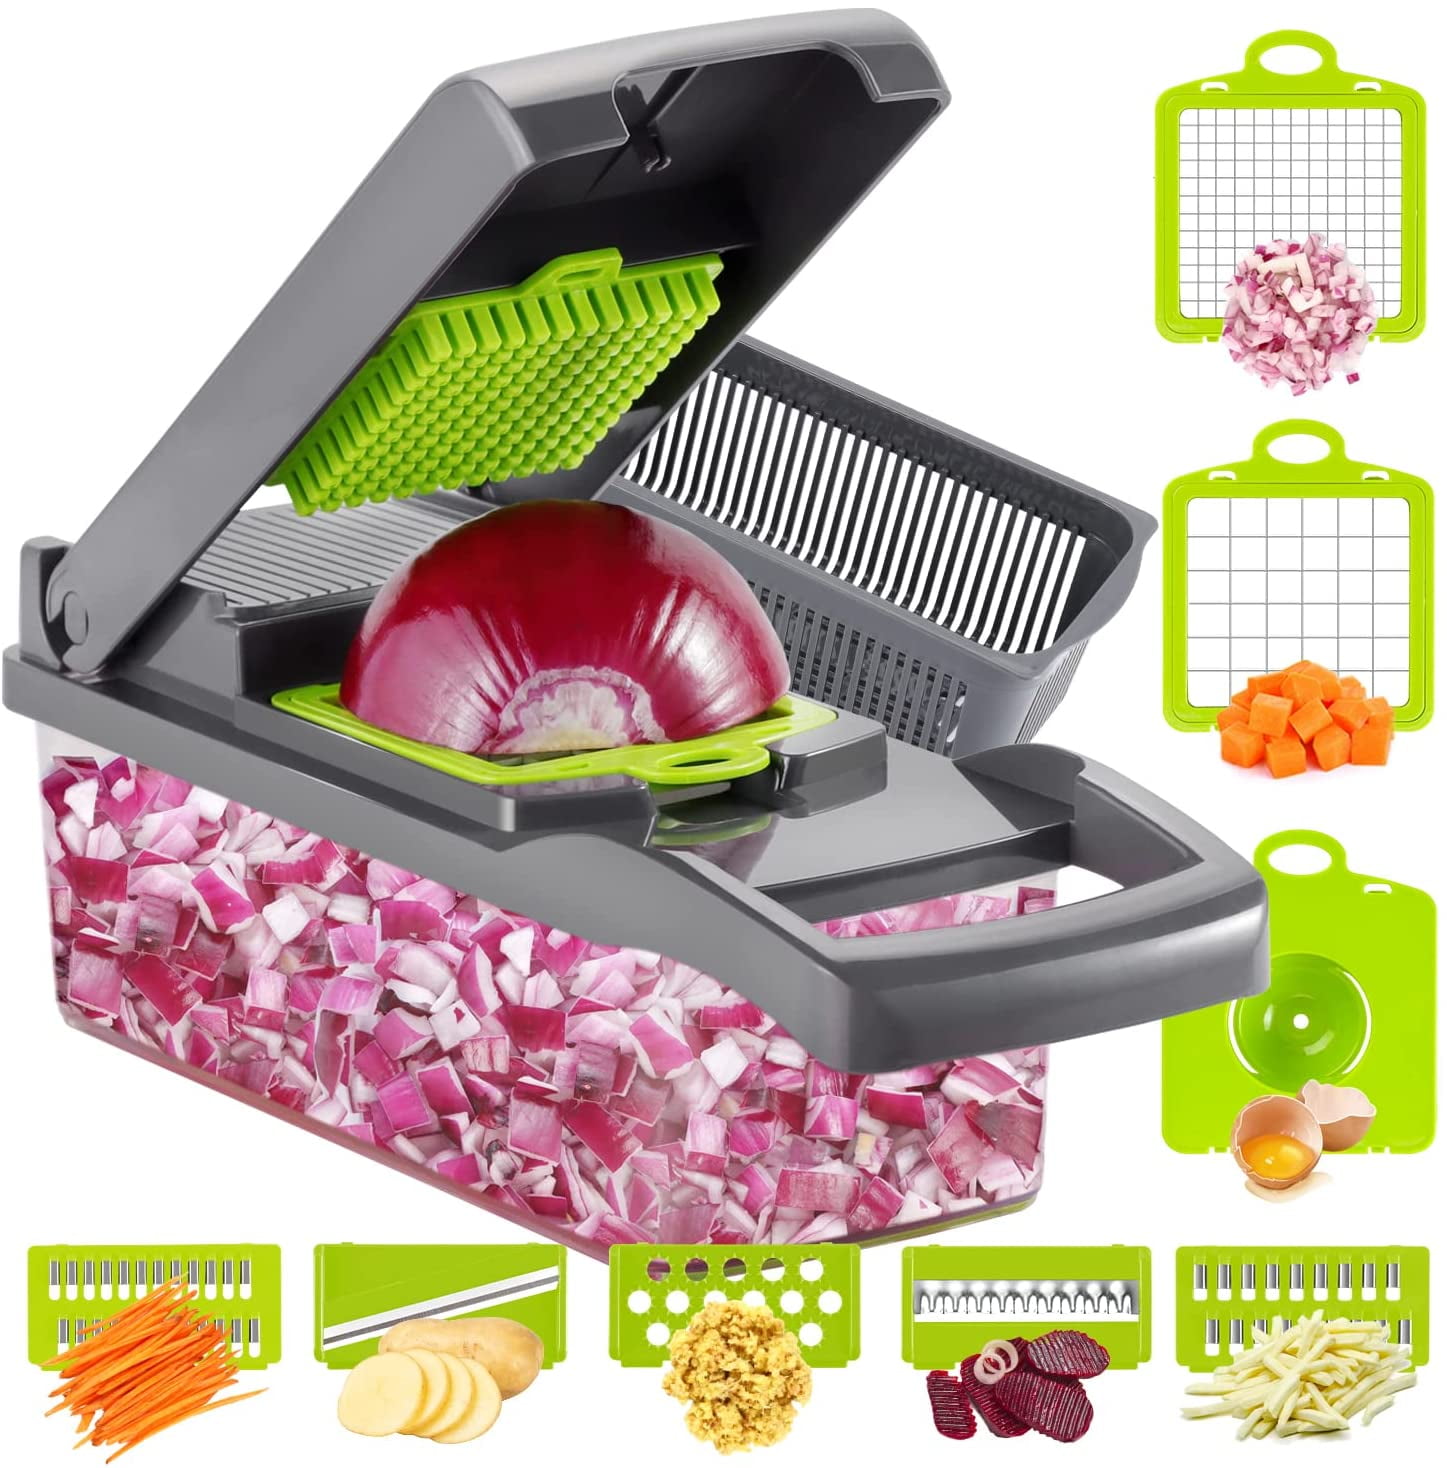 Dropship Vegetable Chopper 14 In 1 Mandoline Slicer Multi-Function Kitchen  7 Replaceable Stainless Steel Vegetable Cutter With Egg Separator Hand Guard  Julienne Grater For Onion Potato Fruit to Sell Online at a